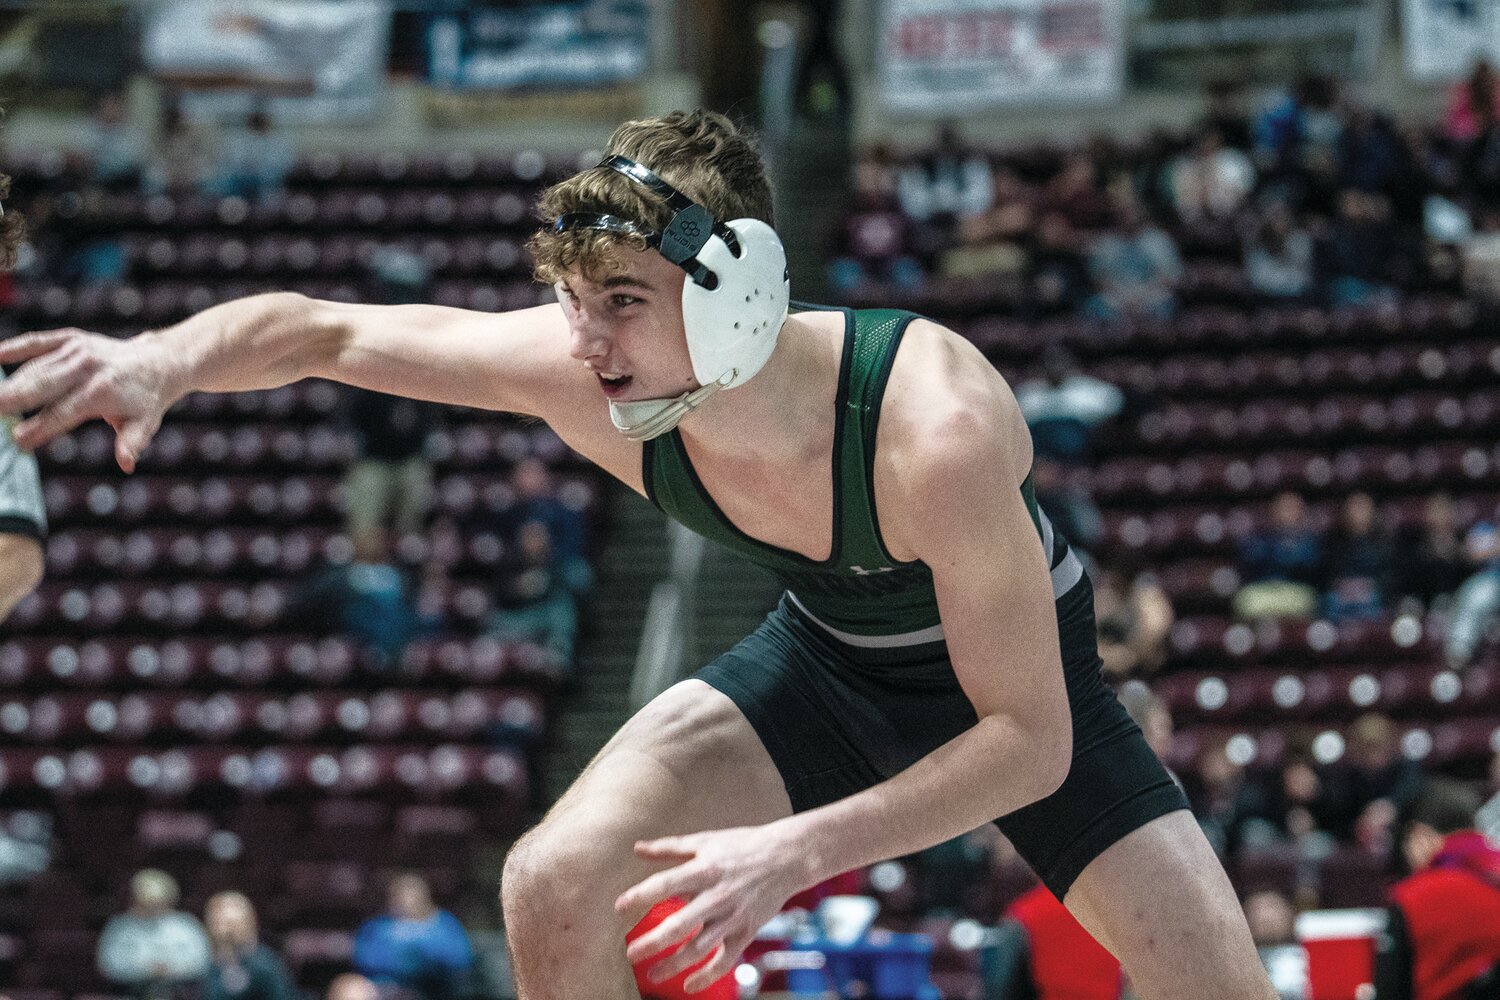 Pennridge’s Quinn McBride finished sixth in the 127-pound class.